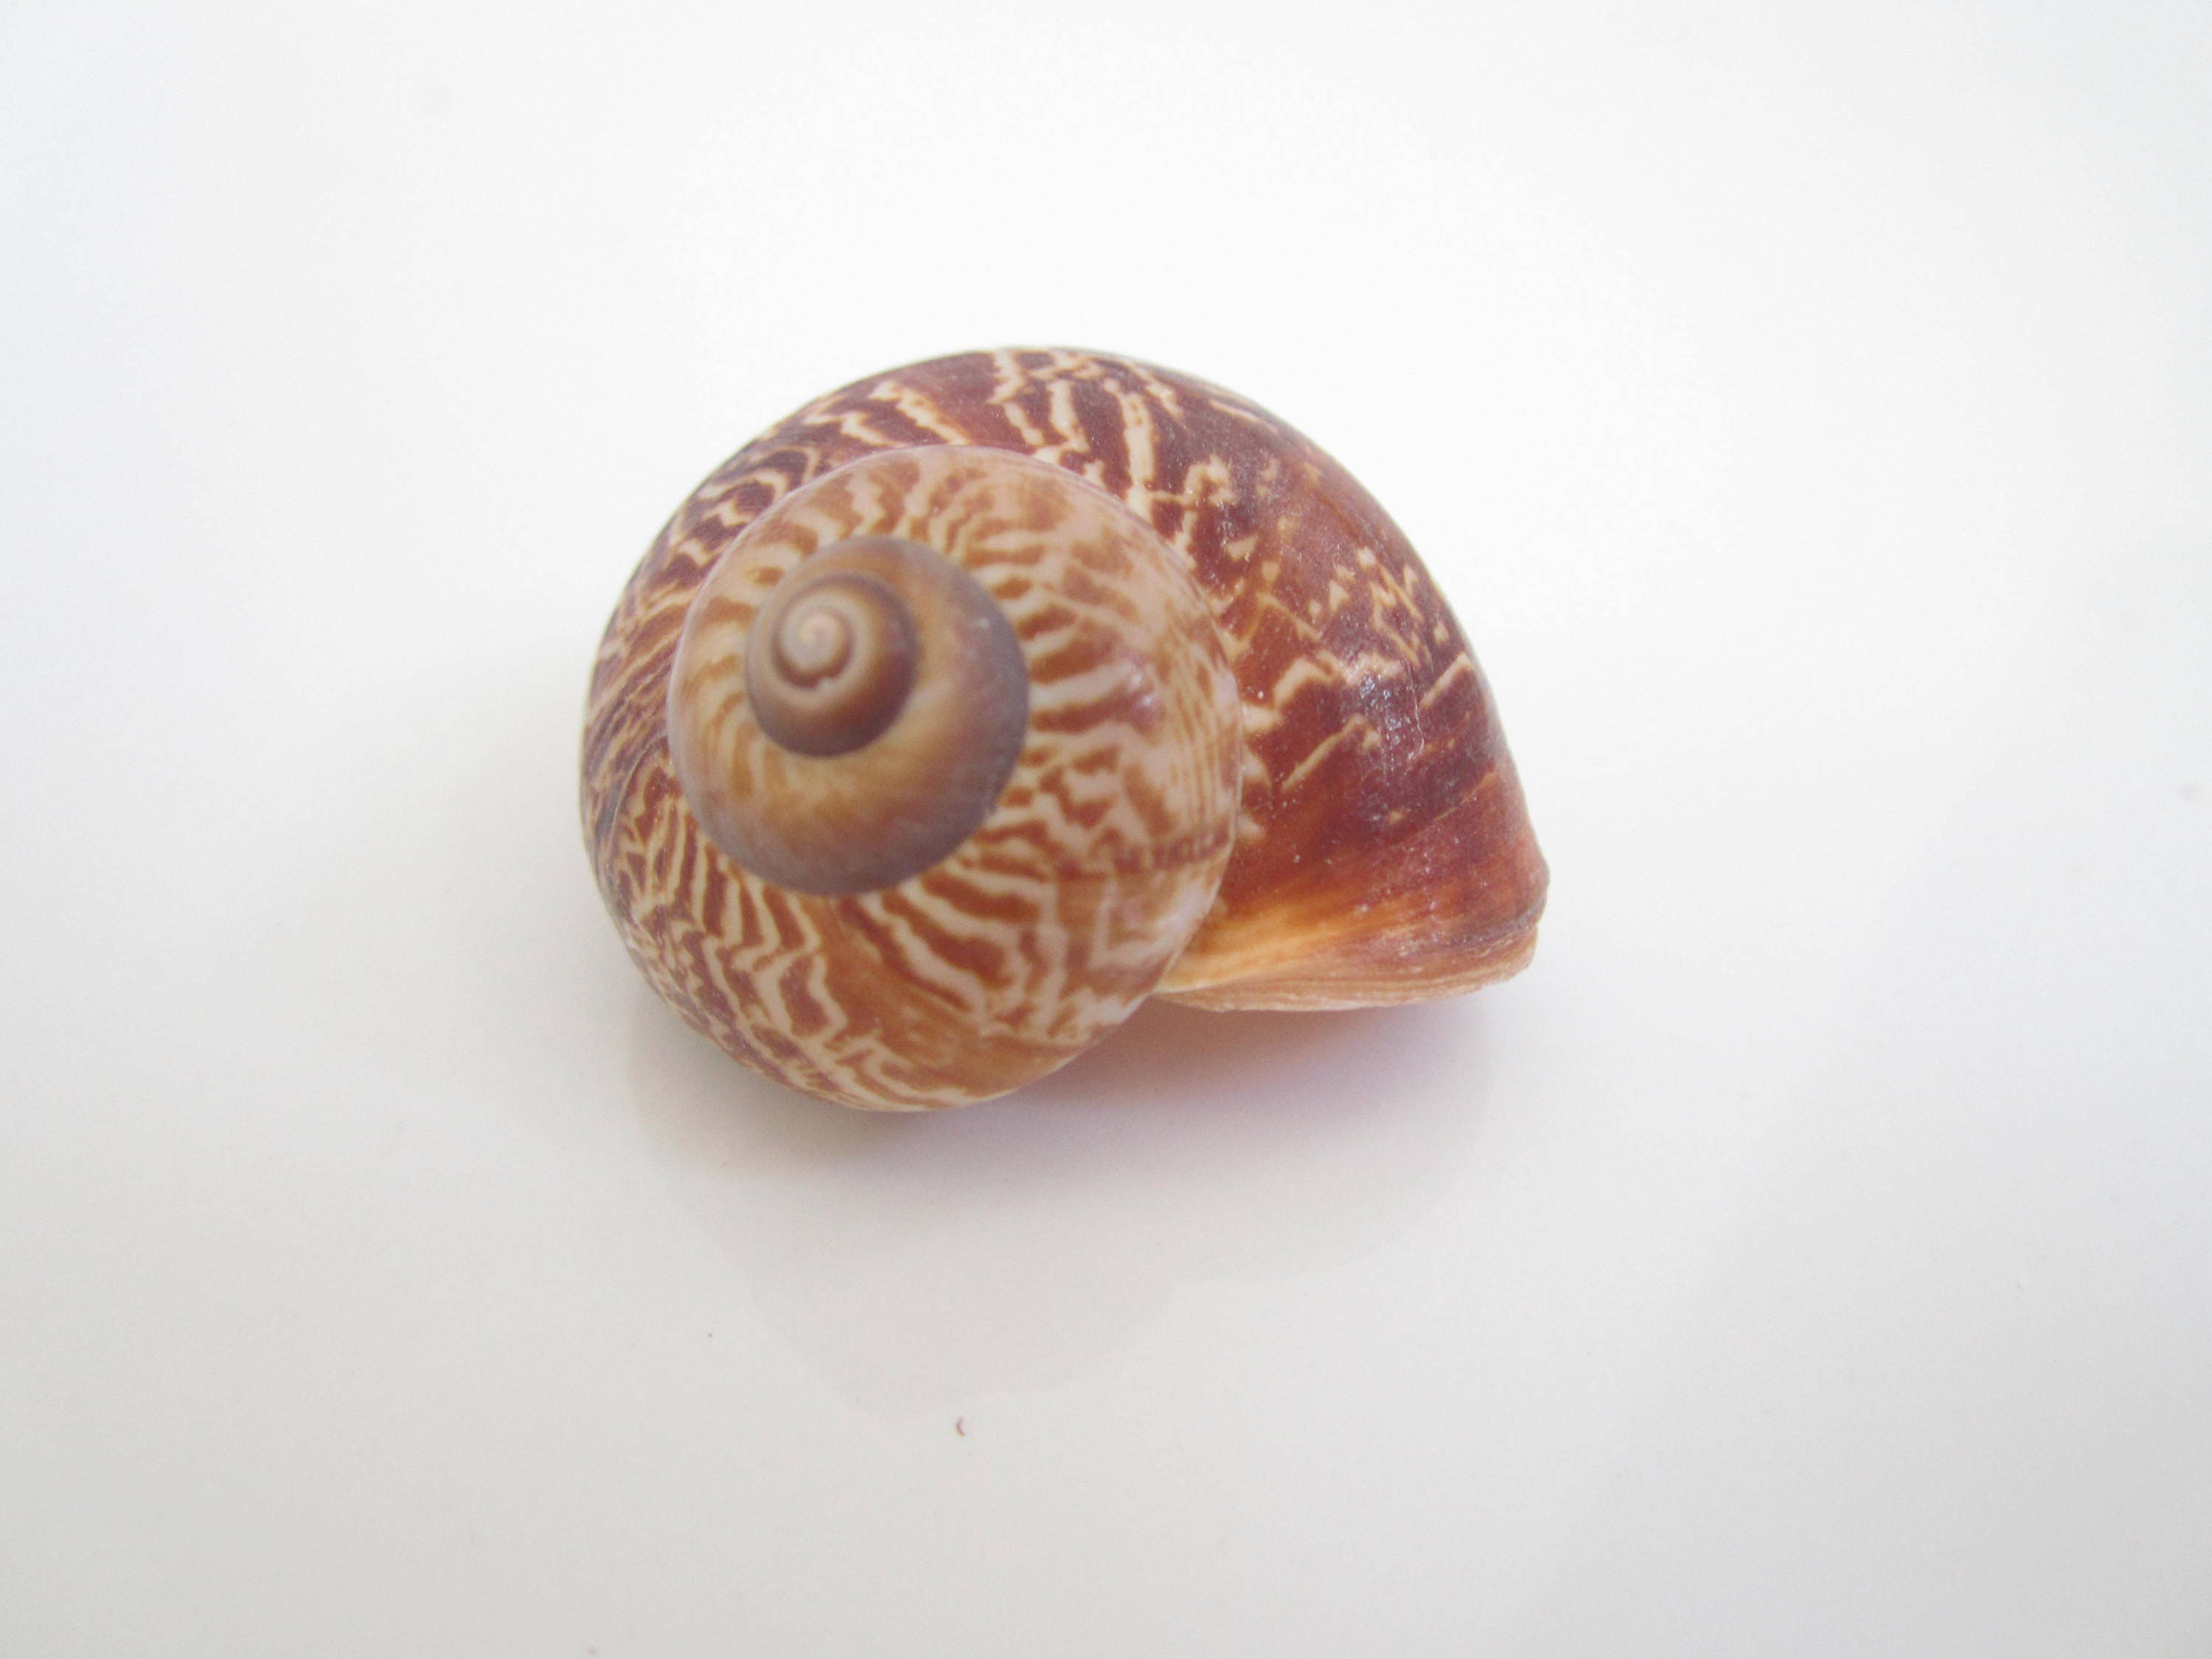 Land Snail Shells For Crafts Large Size Brown Color, 1 12 - 2 inch range  SS-105